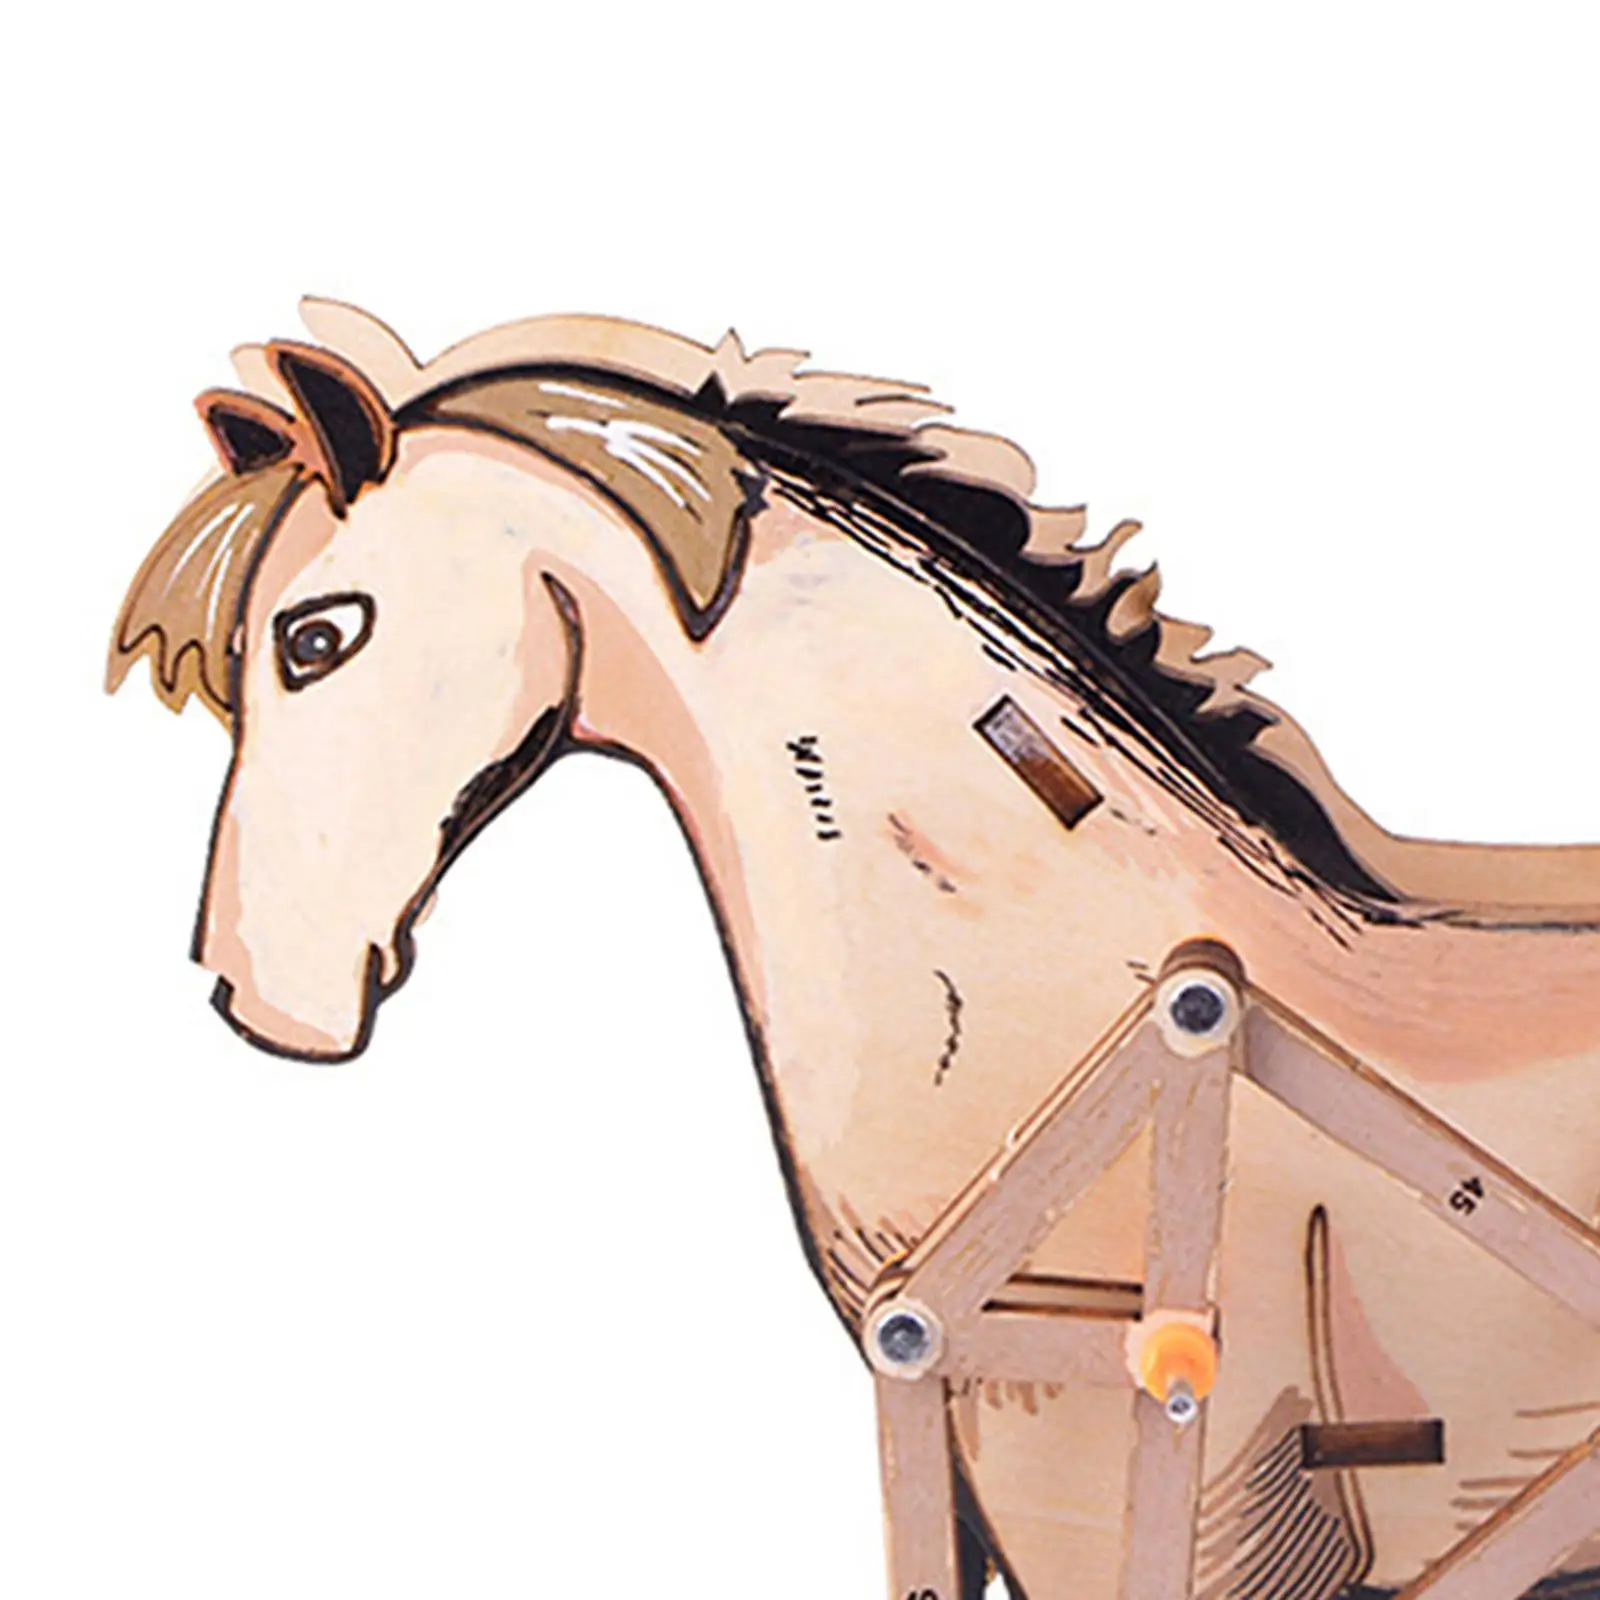 3D Mechanical Horse Interaction Woodcraft horse Model Learning Wooden